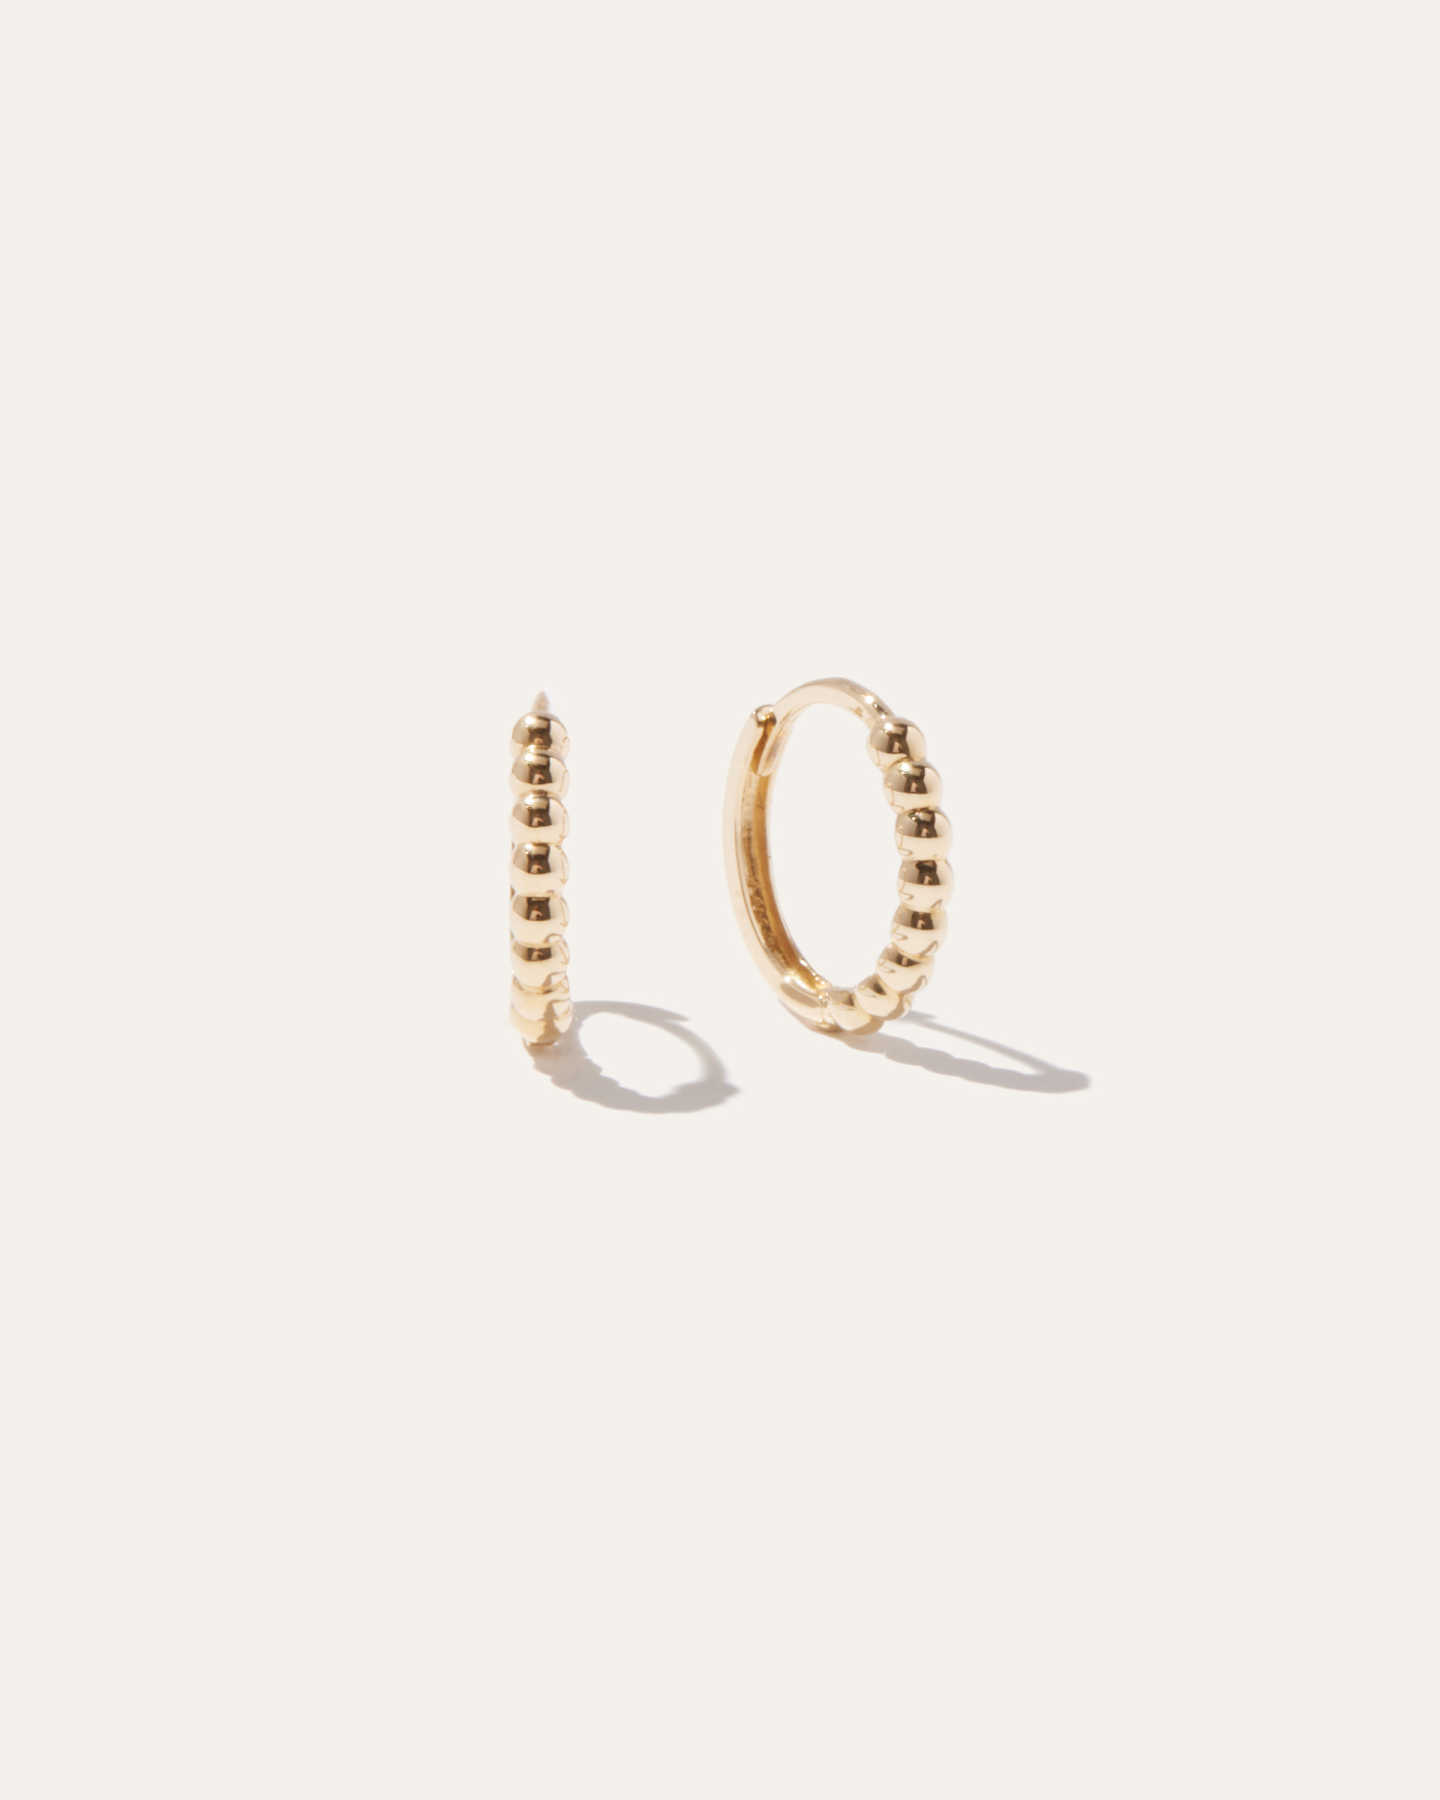 You May Also Like - 14k Gold Beaded Hoops - Yellow Gold